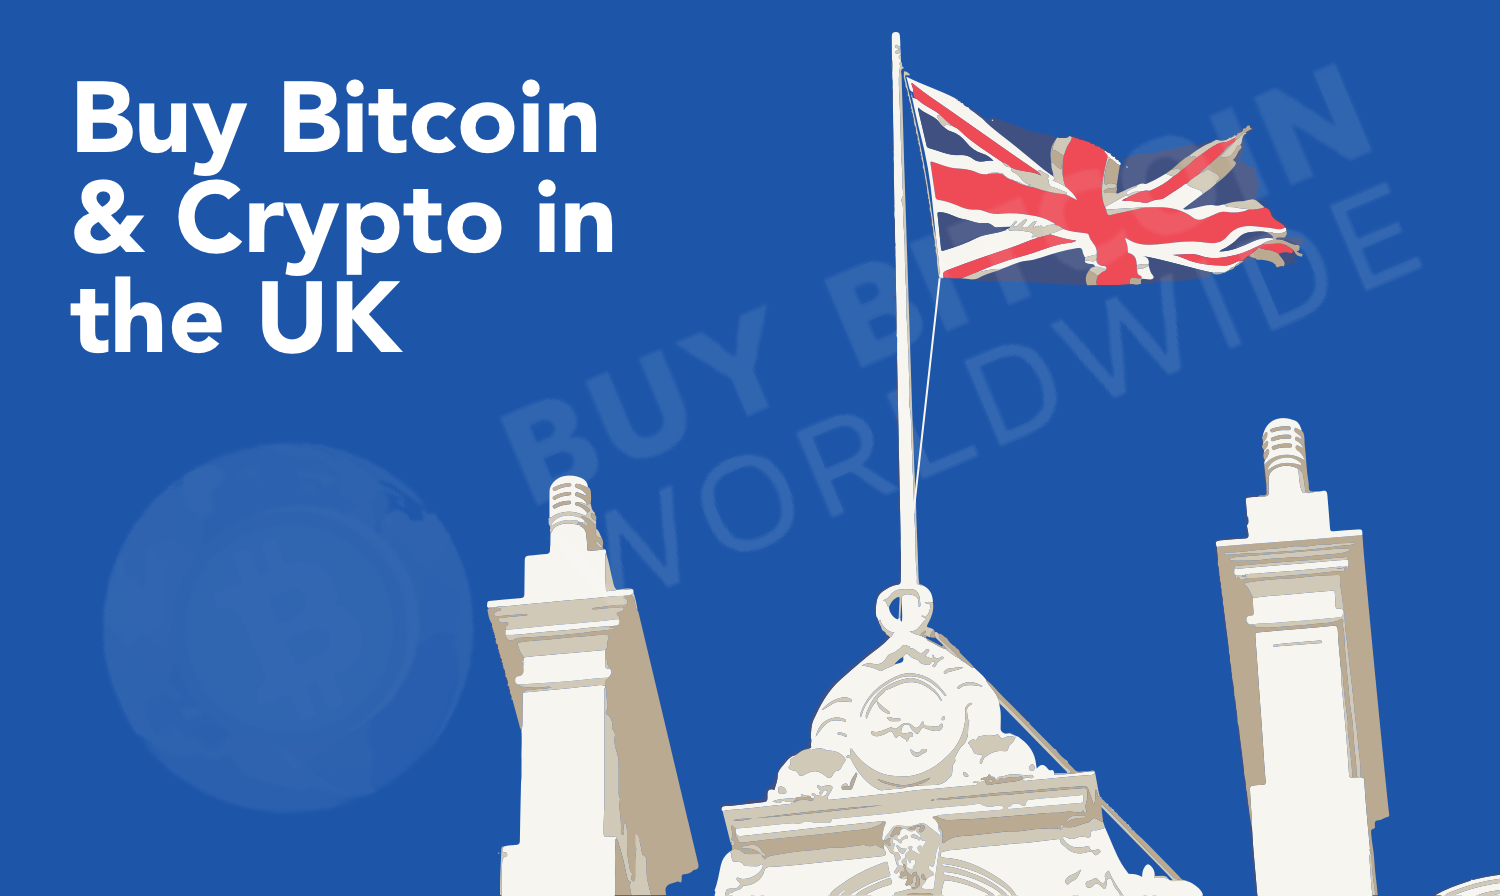 How to buy Bitcoin in the UK: A Step-by-Step Guide